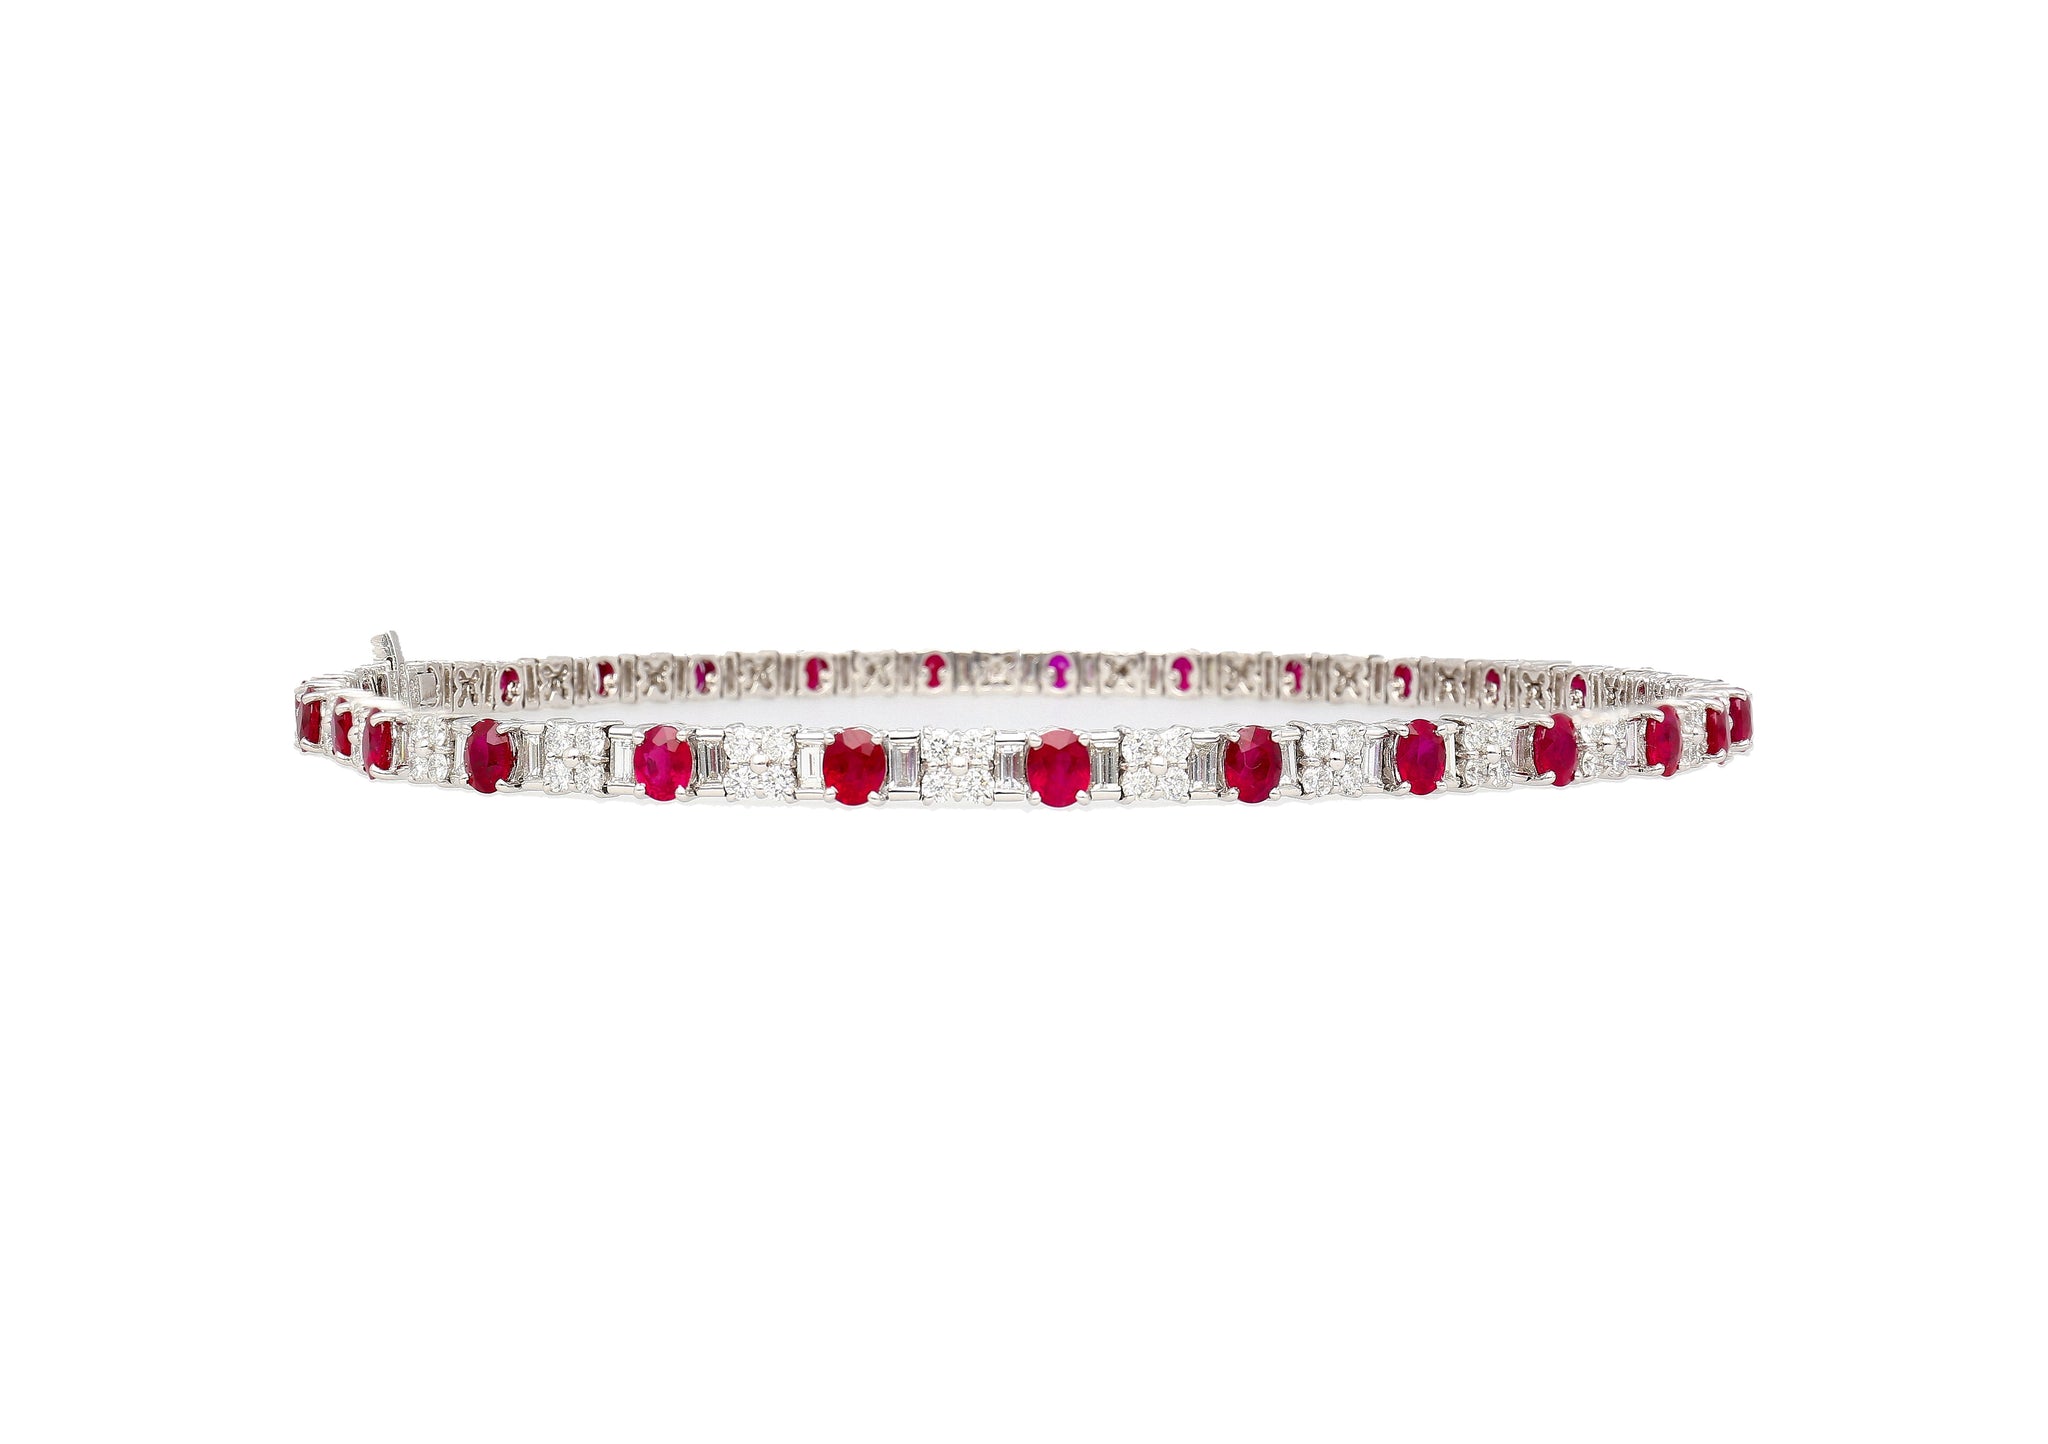 30 Carat TW Oval Cut Ruby and Diamond Tennis Necklace in Platinum